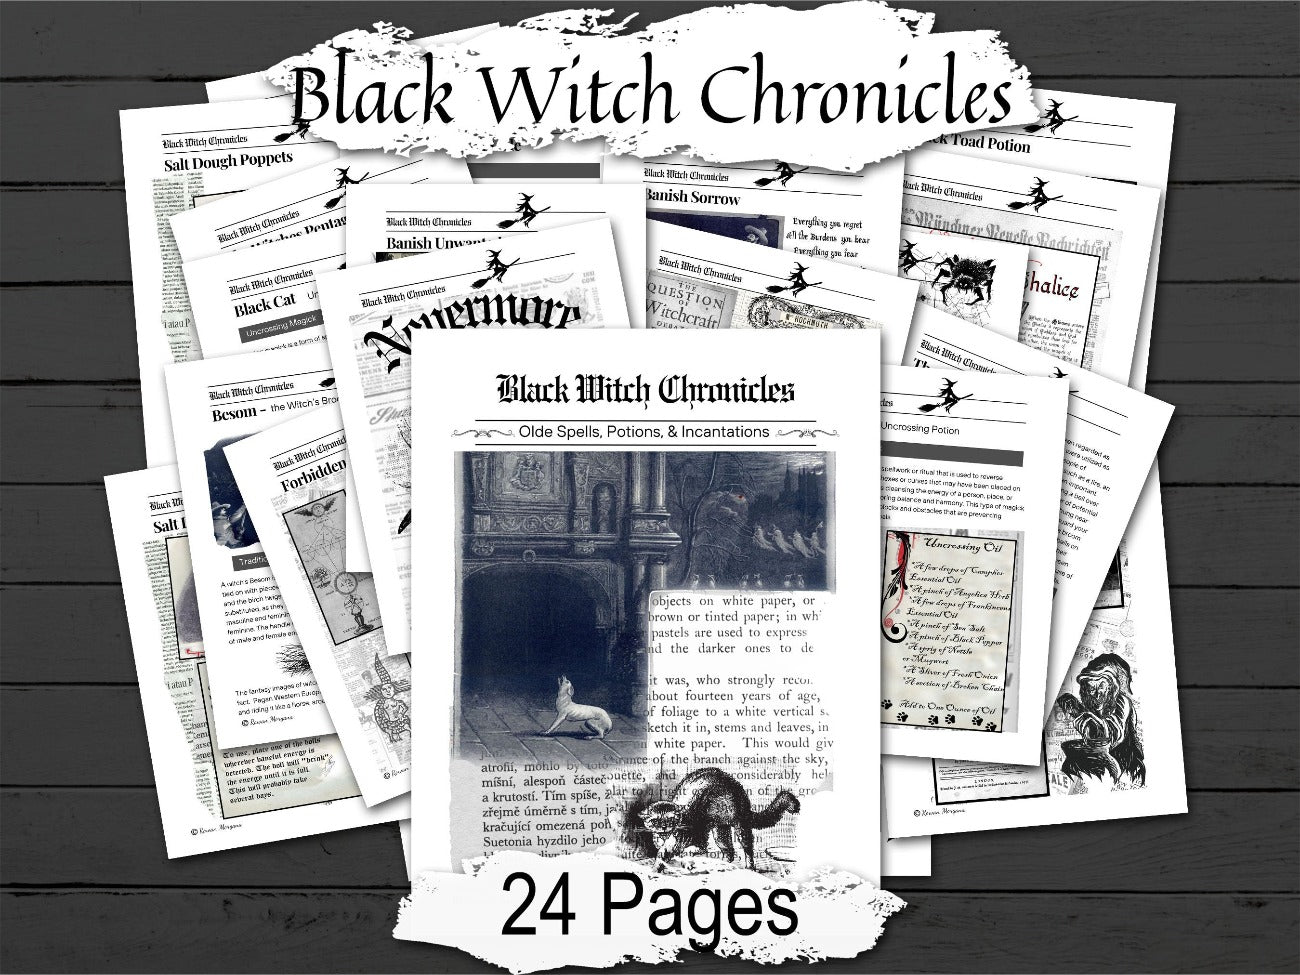 BLACK WITCH CHRONICLES, 24 pages, Olde Spells Potions, Incantations, Banish Spirits, Witchcraft belladonna flying oil, Besom and Chalice - Morgana Magick Spell